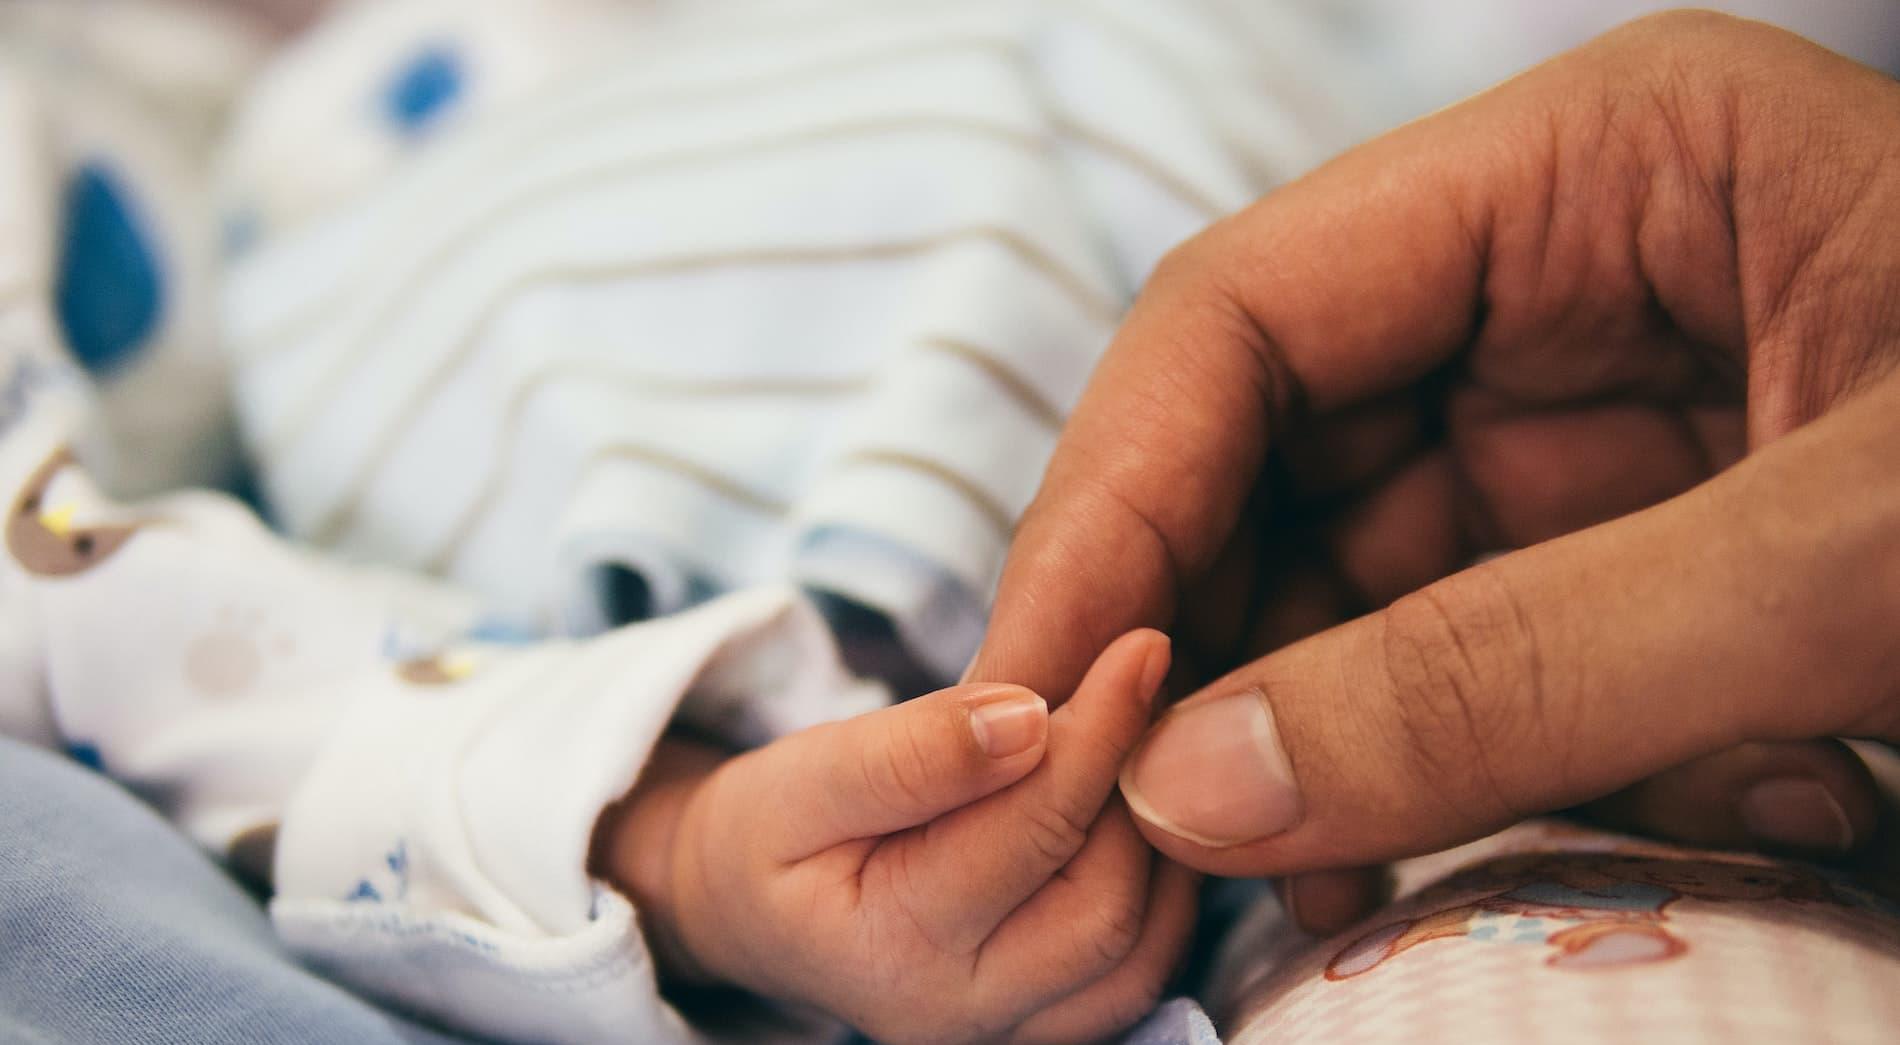 An adult's hand holding a baby's finger